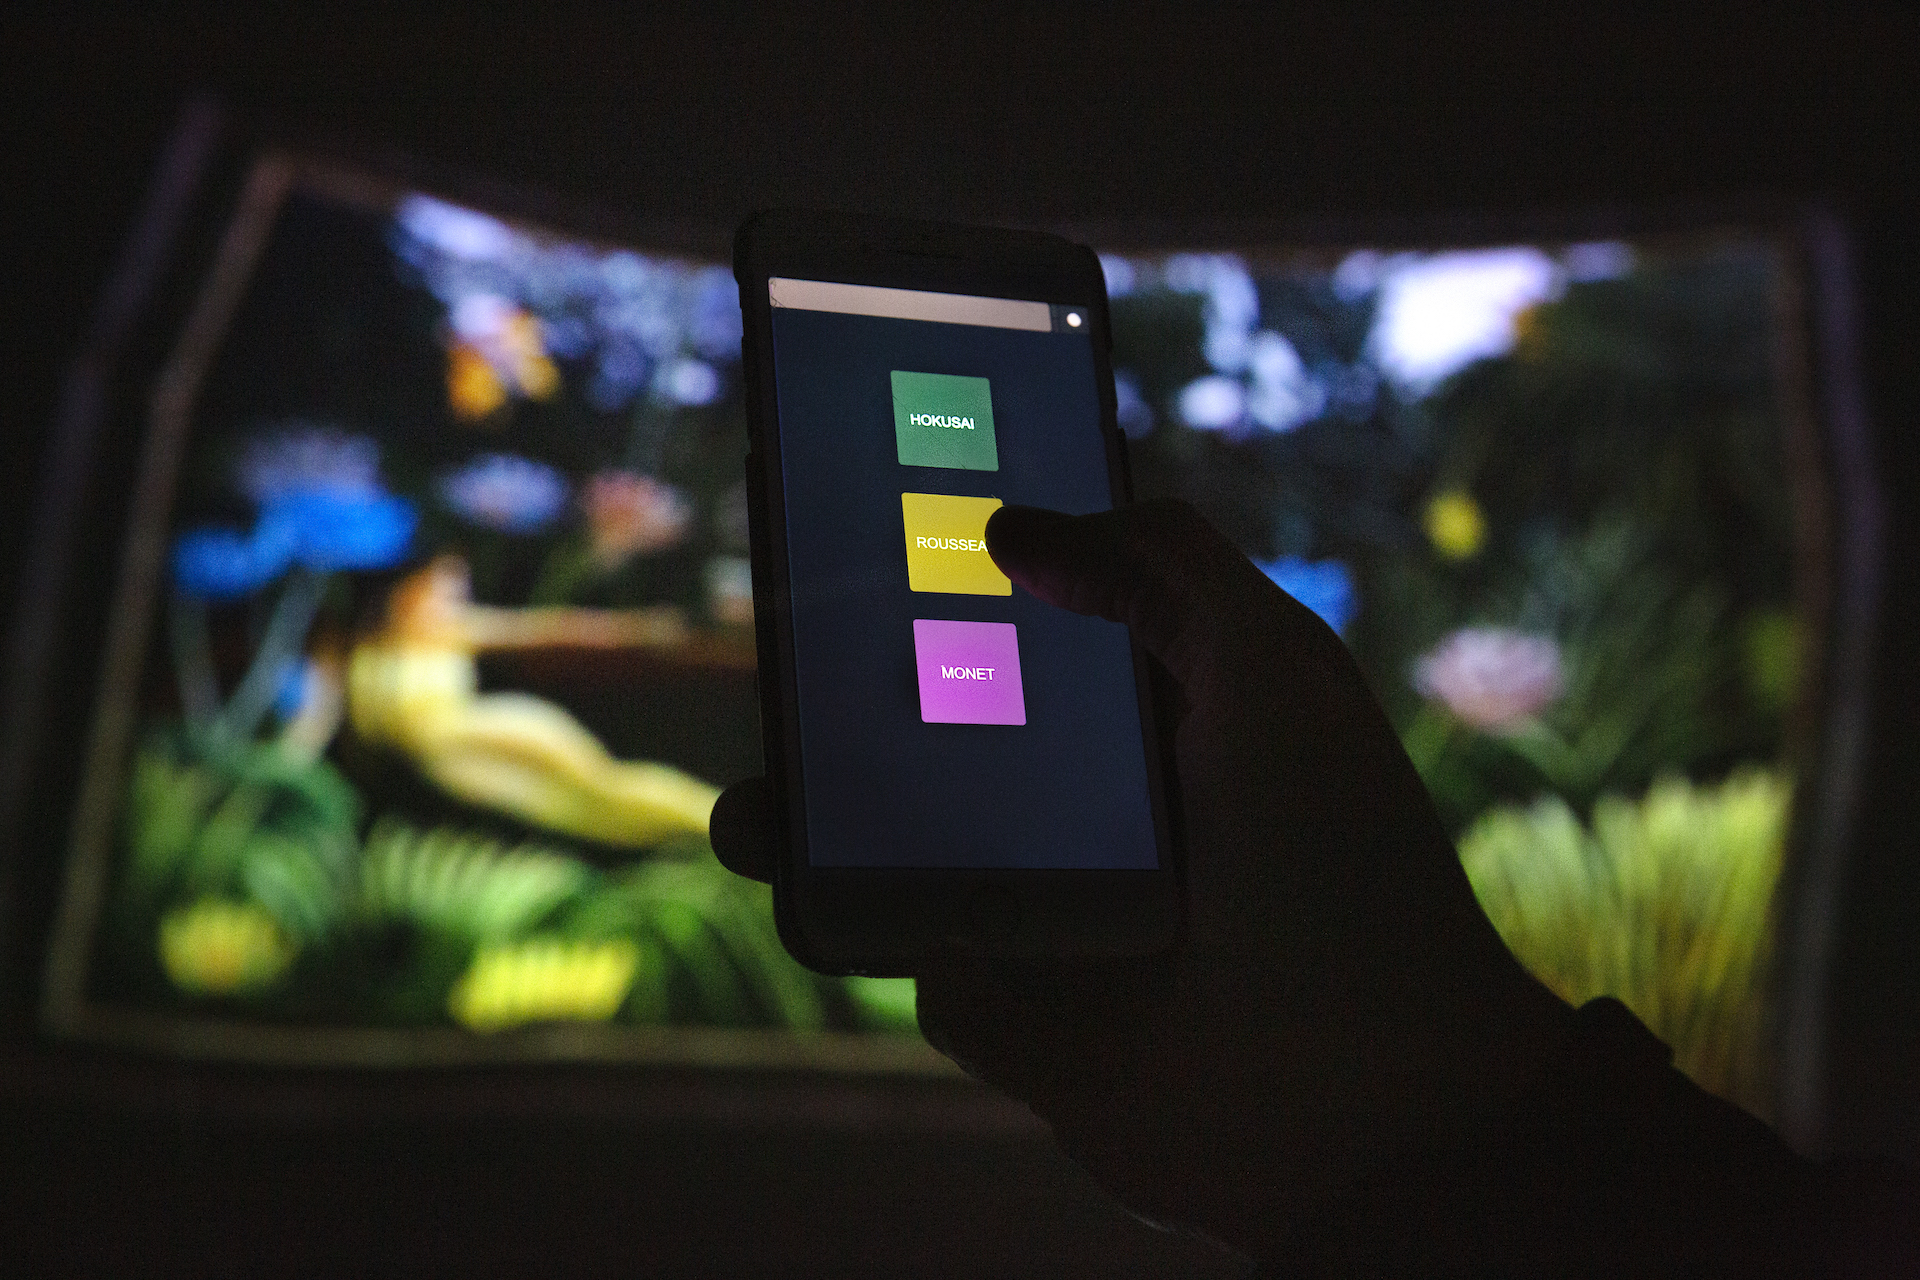 A hand holding a phone showing the app that runs the fulldome projections, with three buttons labelled Hokusai, Rousseau, and Monet. An unfocused image of a fulldome projection of Rousseau's The Dream is the backdrop.